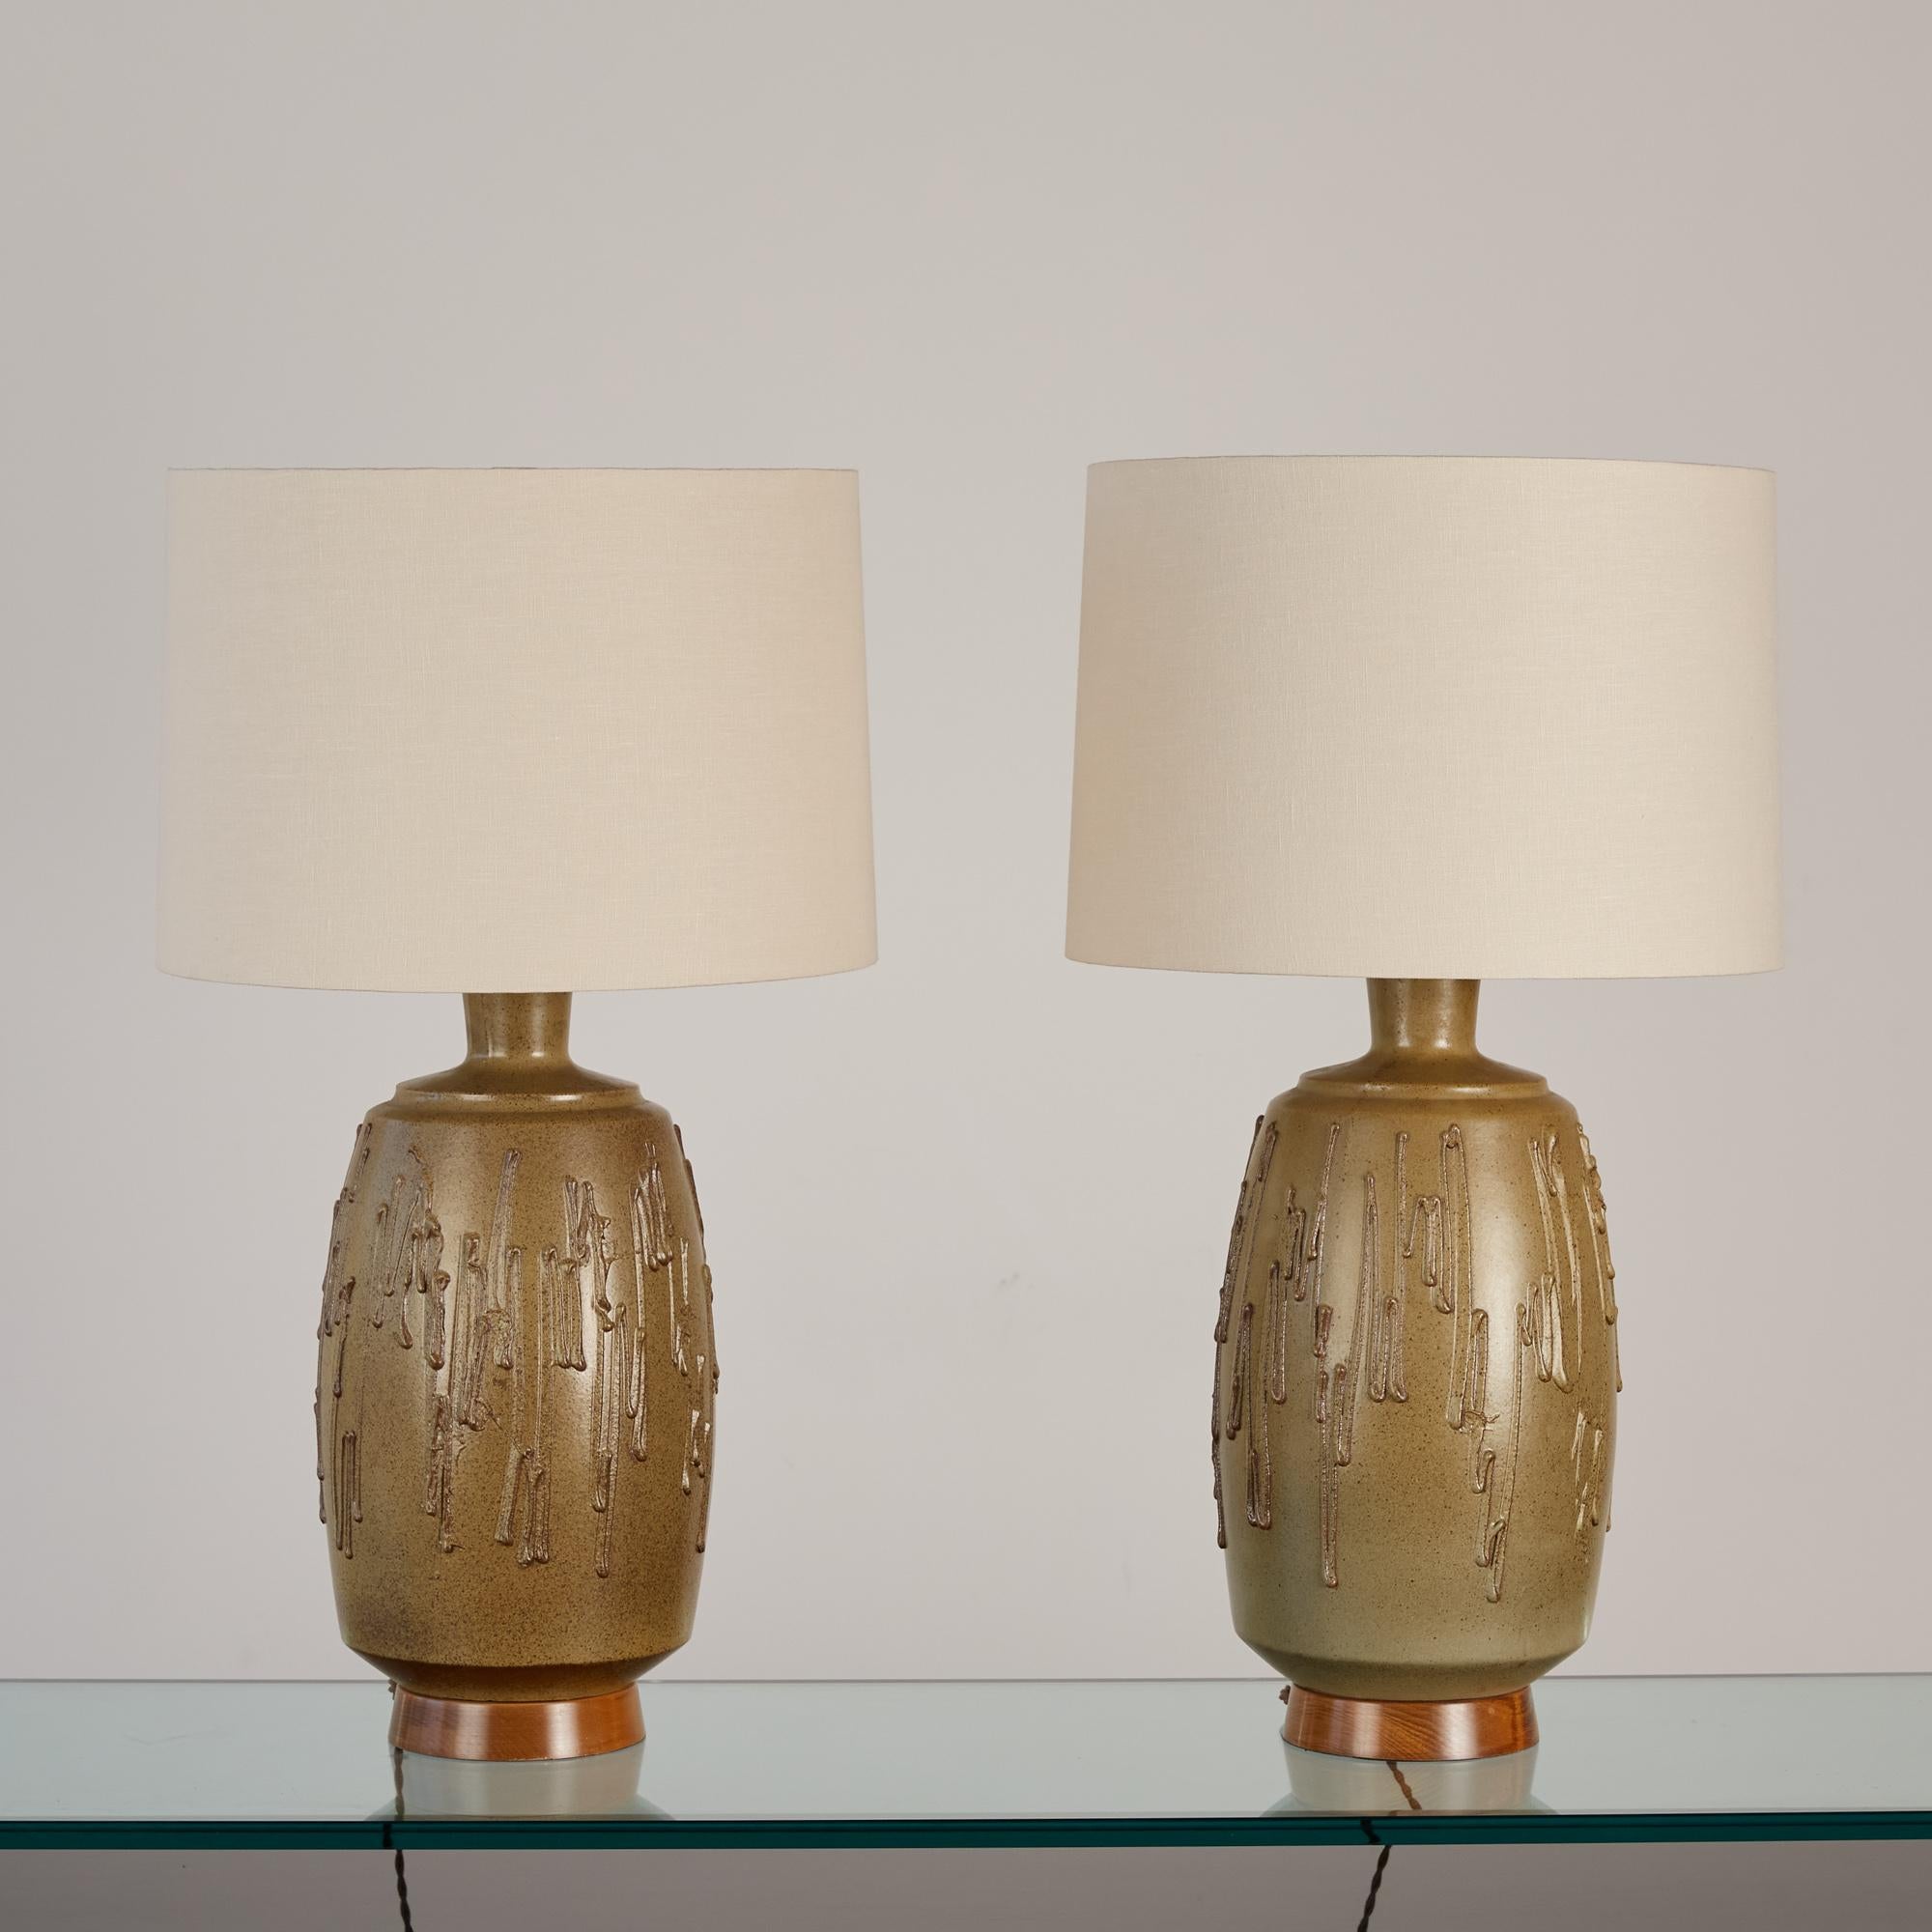 Pair of David Cressey stoneware lamps, USA, c.1960s. The wheel thrown stoneware lamps feature a speckled olive colored glaze with applied textured drip details. The ceramic form sits atop a turned oiled walnut base. The newly rewired lamps feature